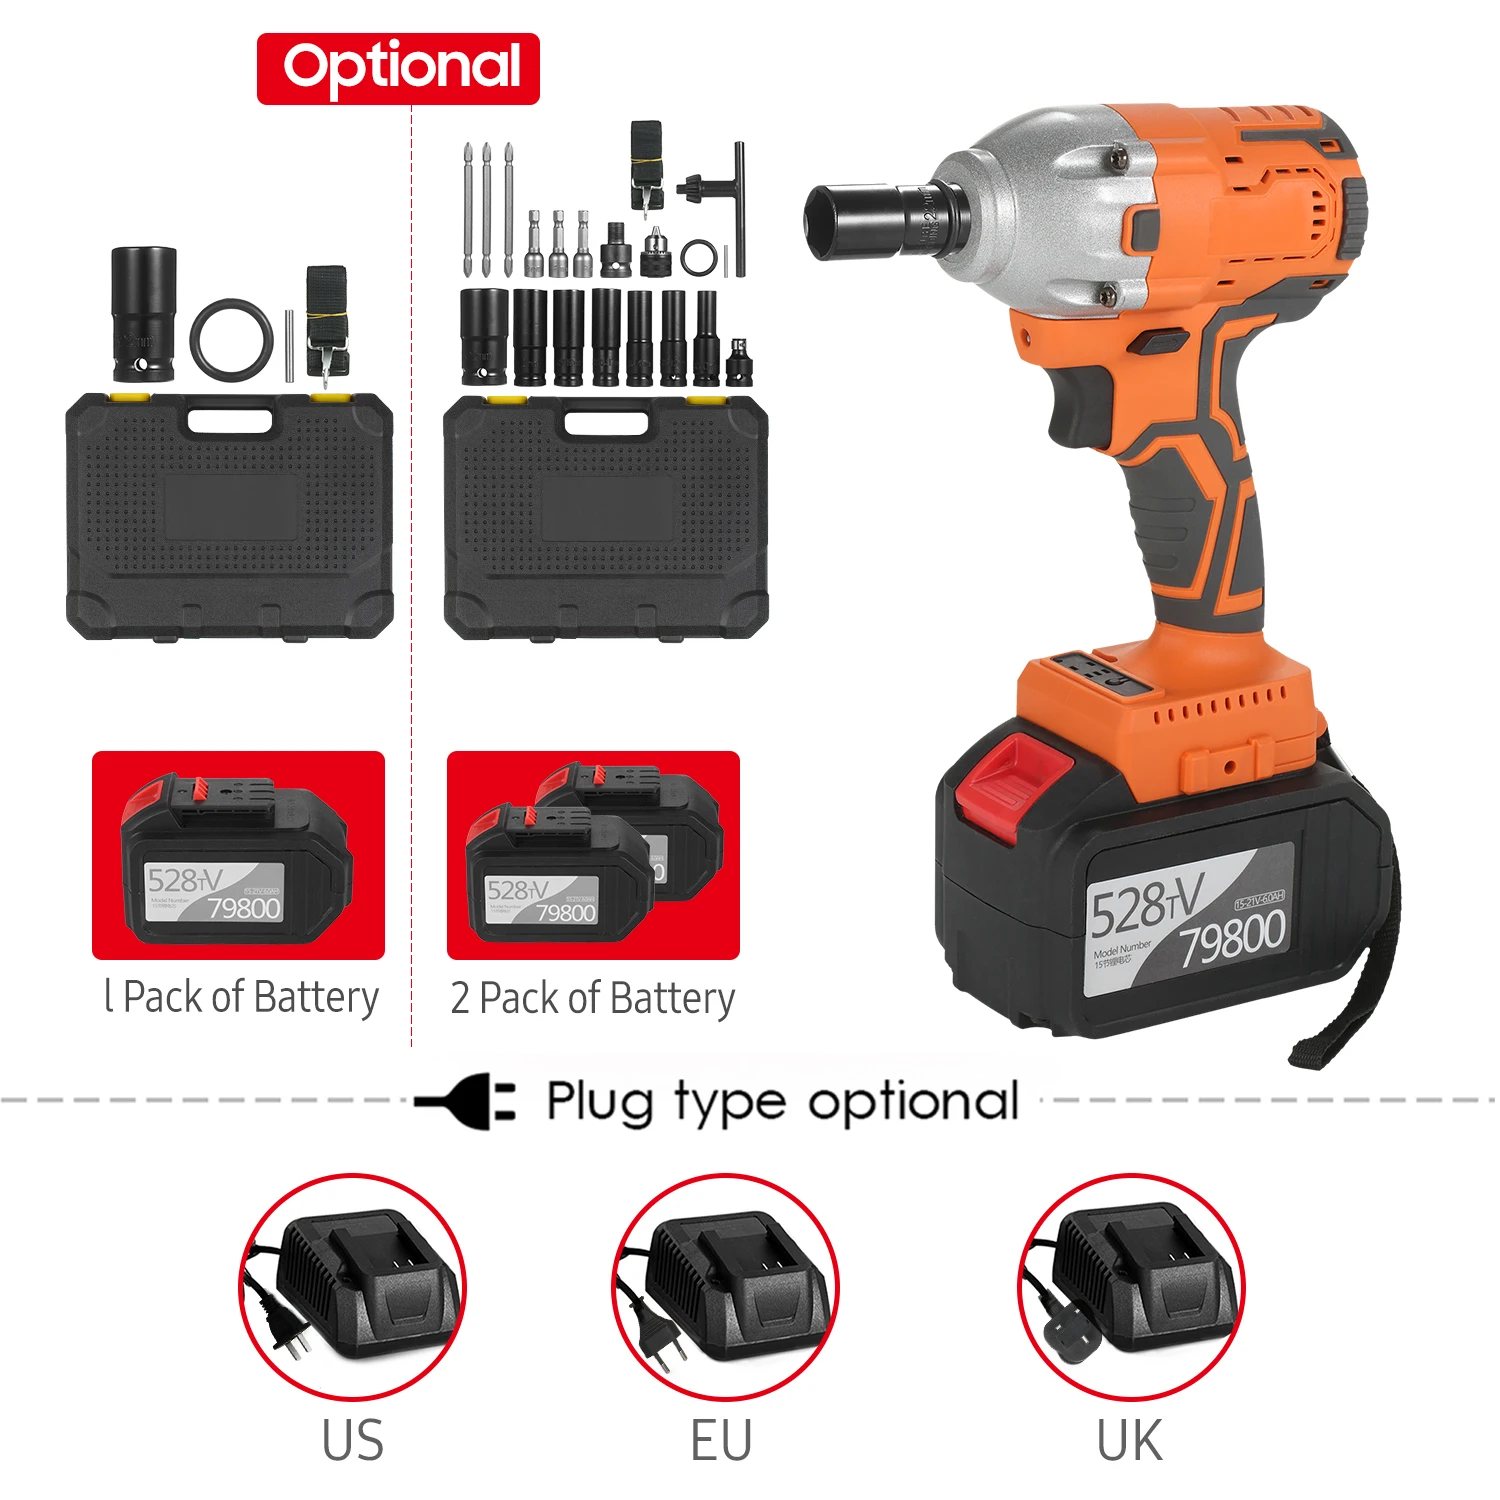 1/2 Inch Impact Nut Gun 3 Amp Hour Battery 380NM Torque Cordless with 4 sockets 